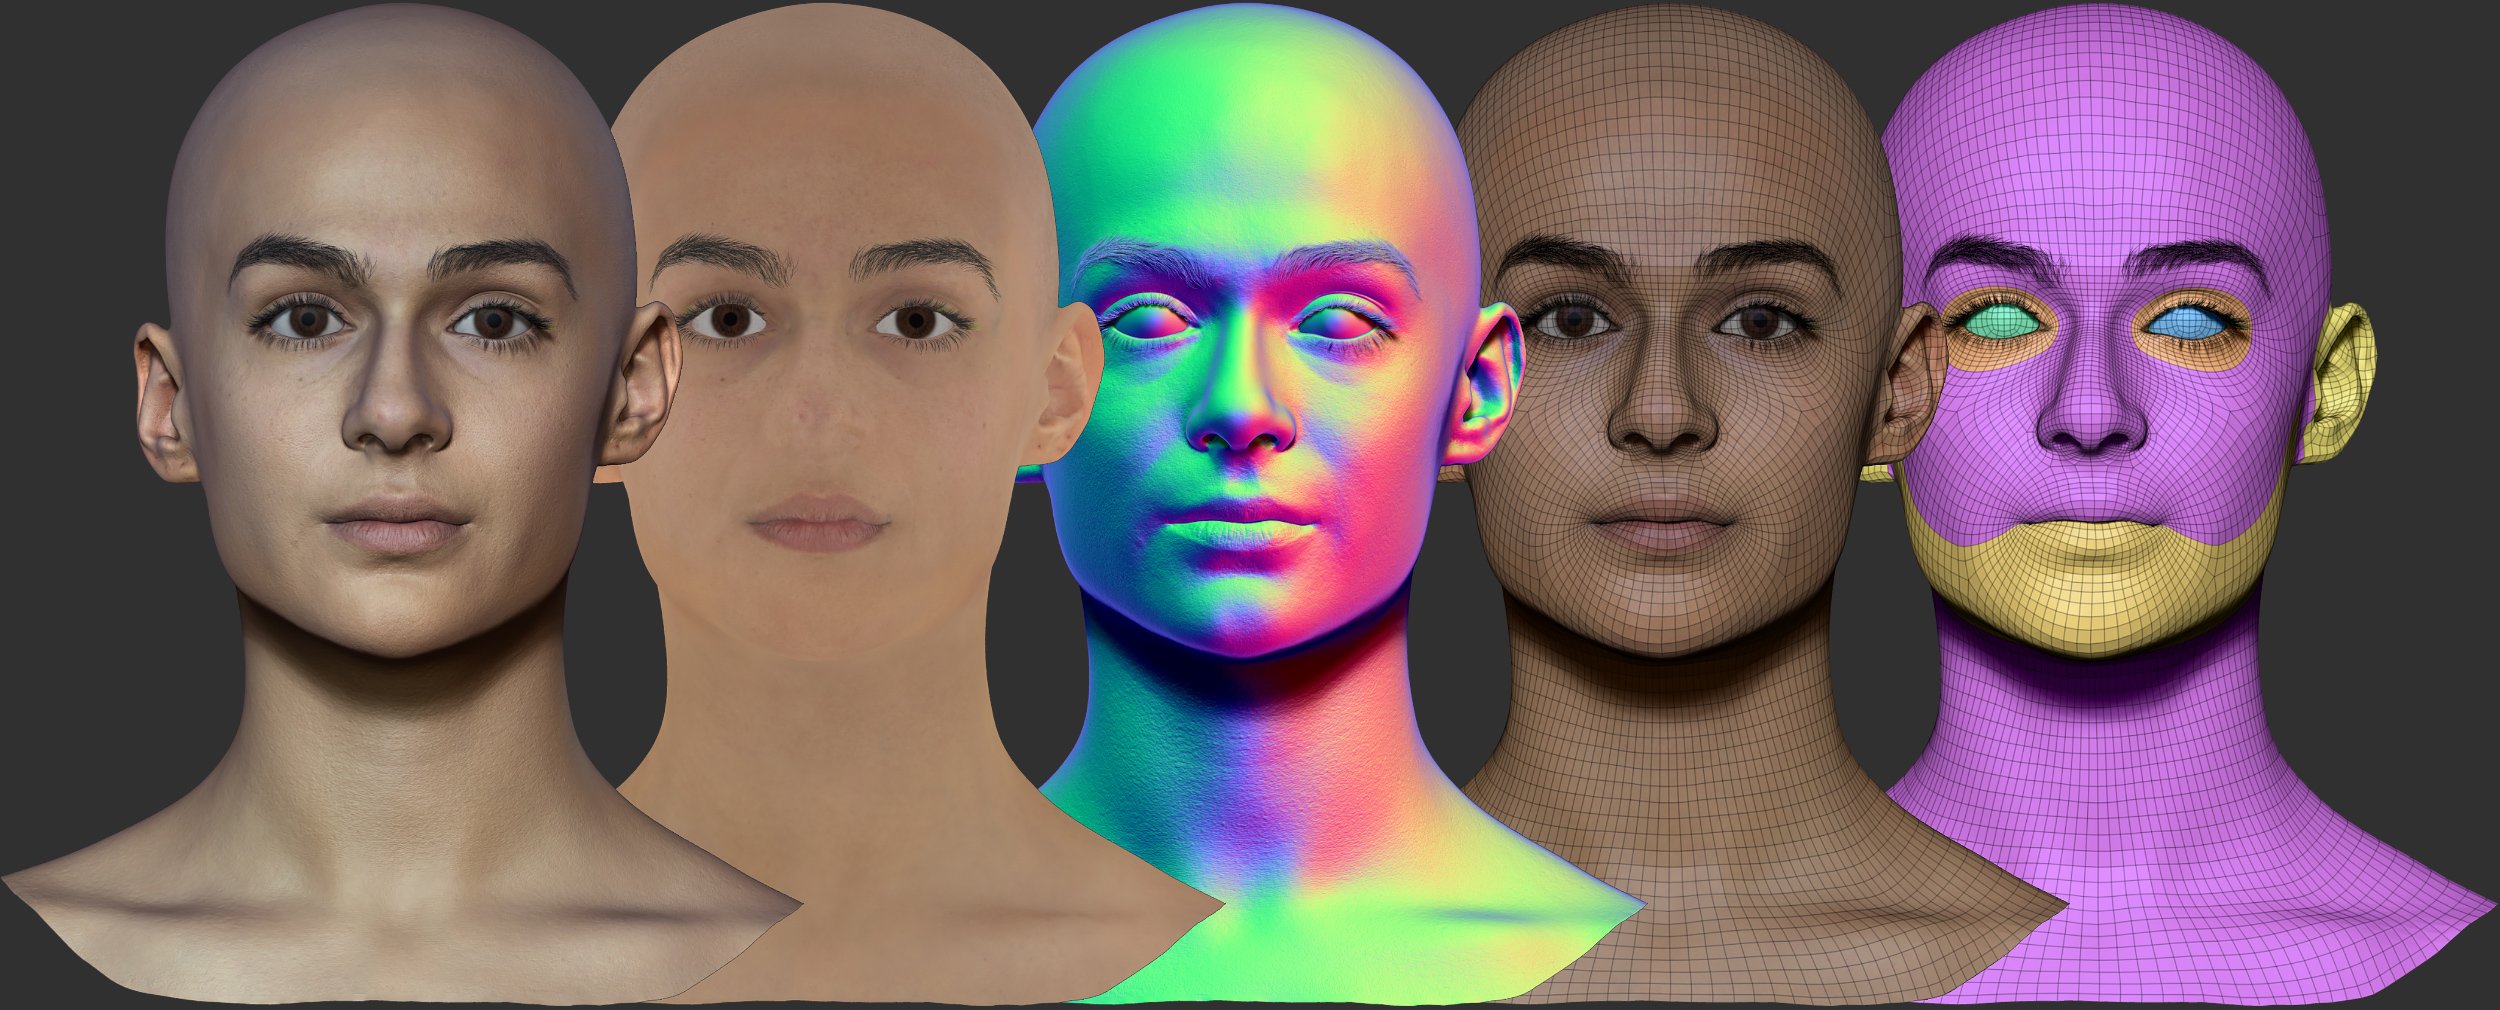 Female head model download with UV maps and textures